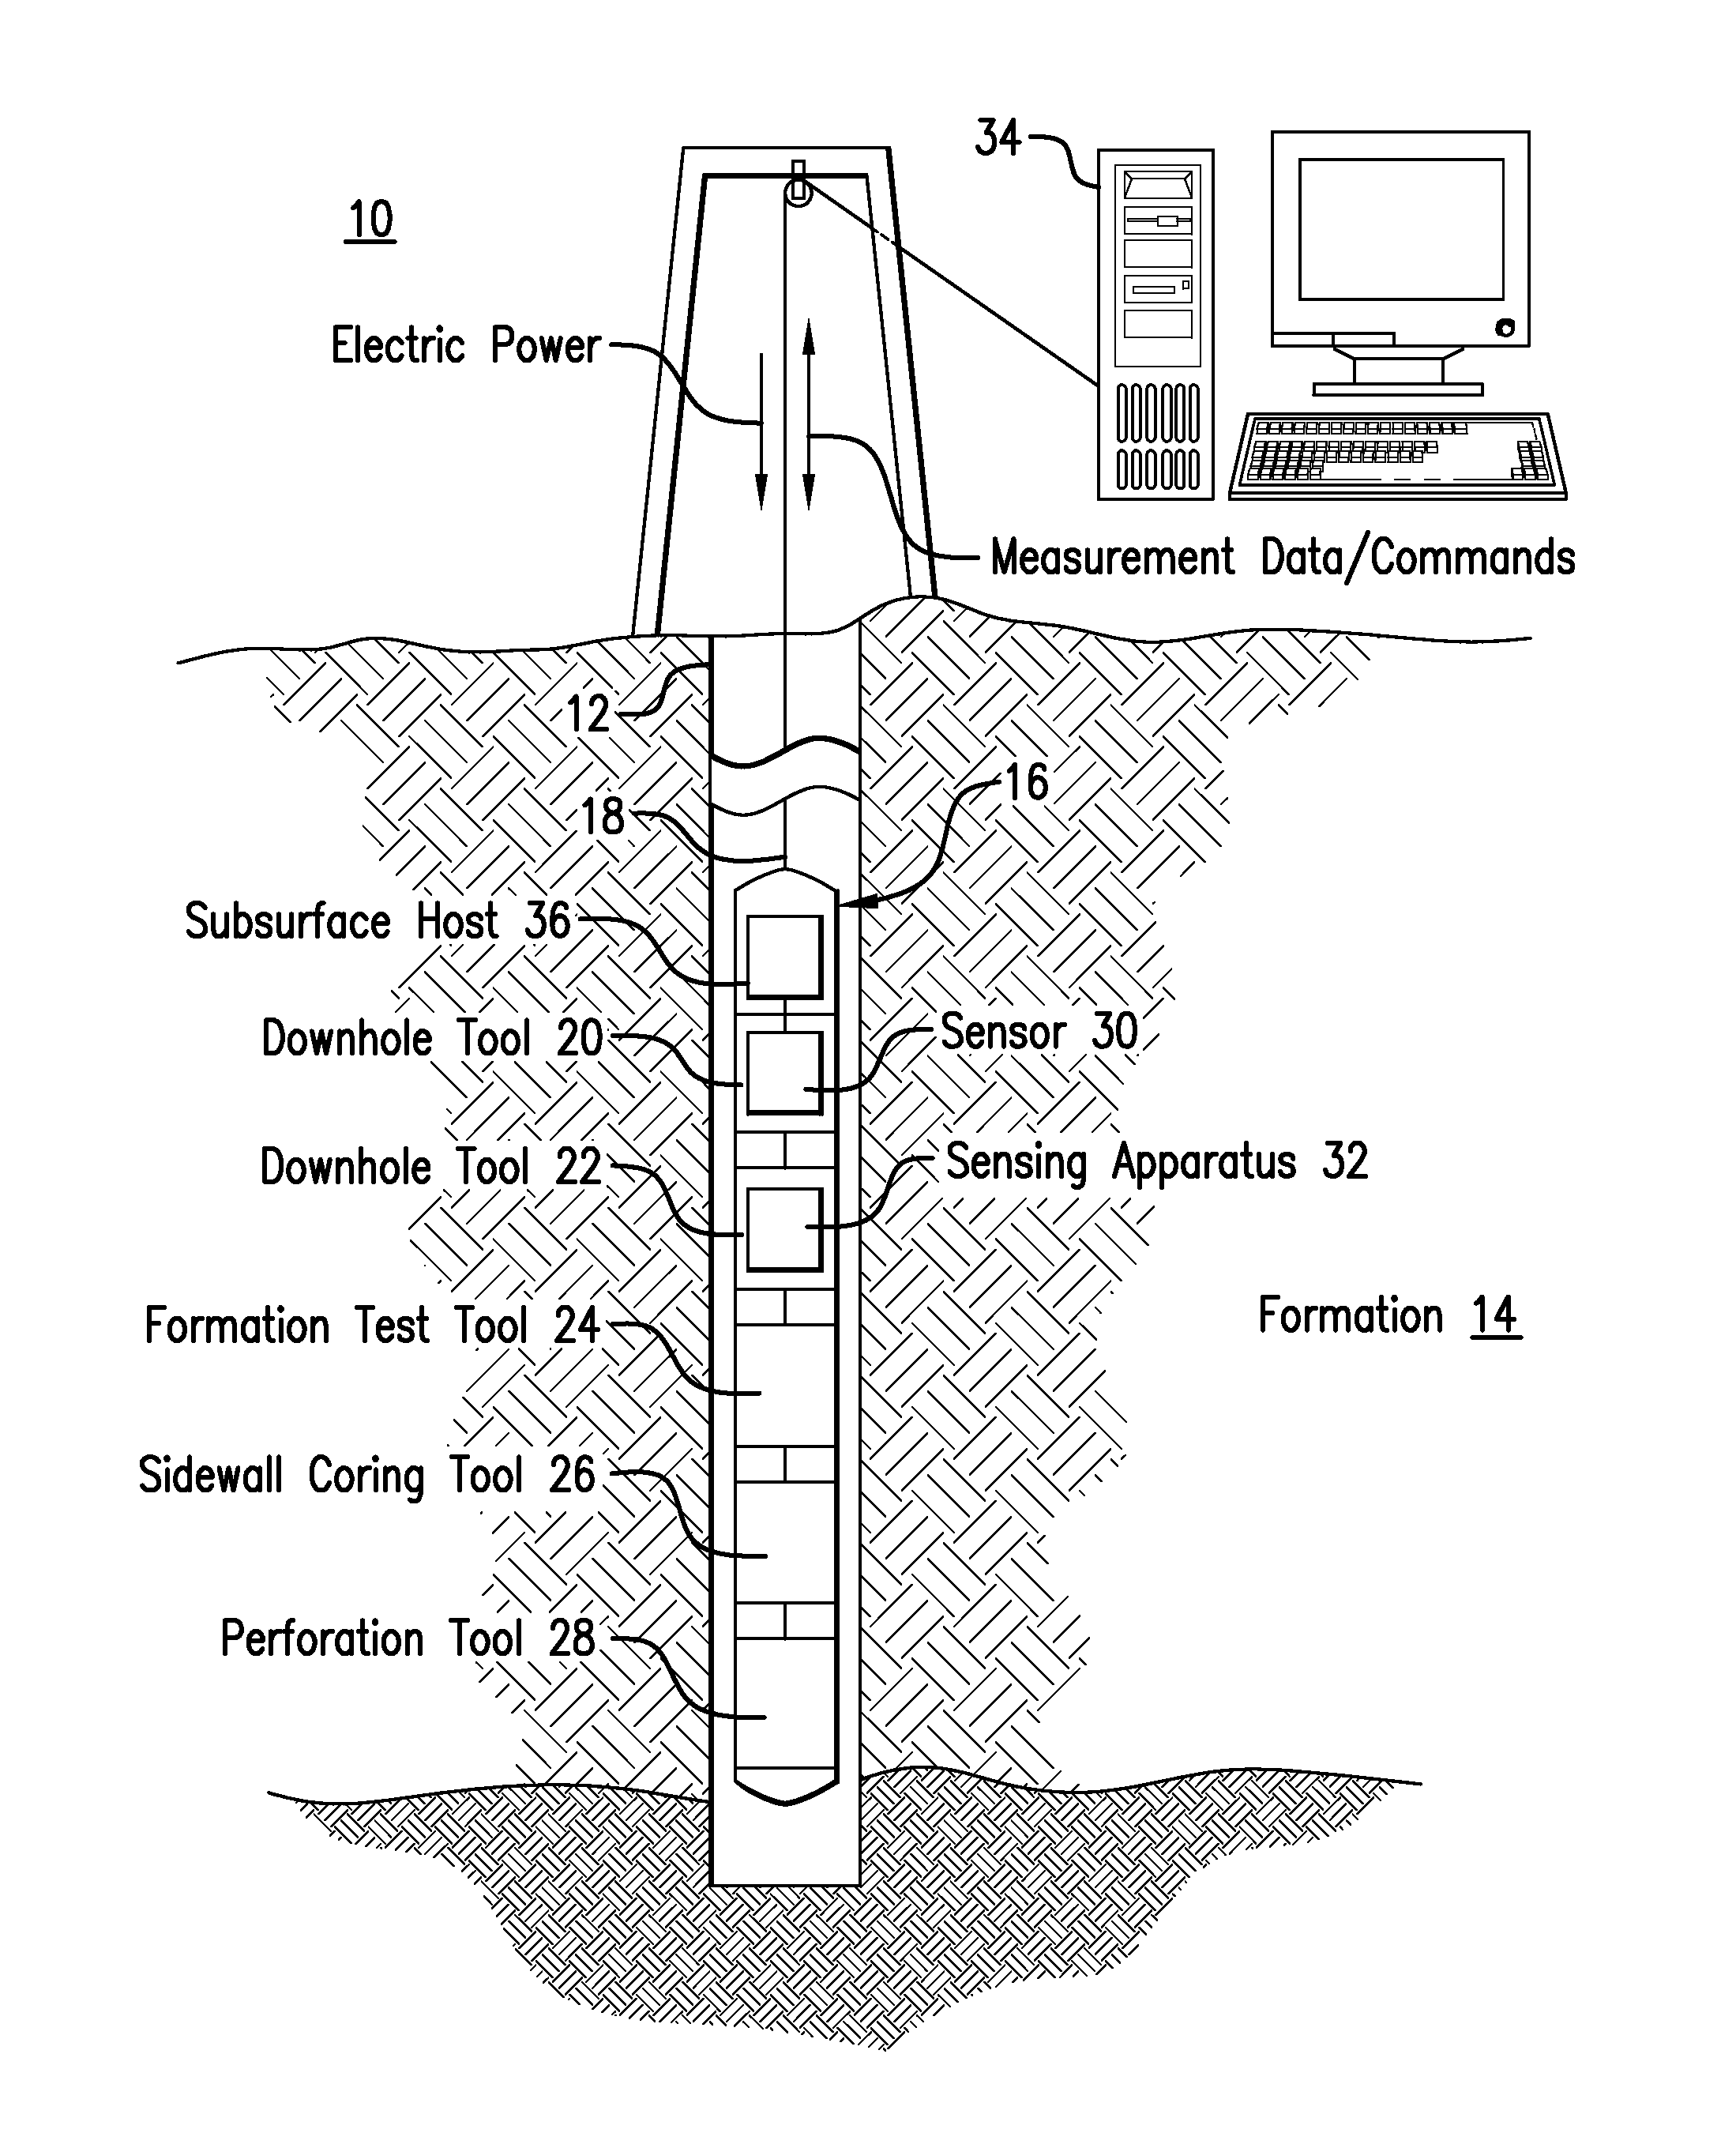 Communication between downhole tools and a surface processor using a network